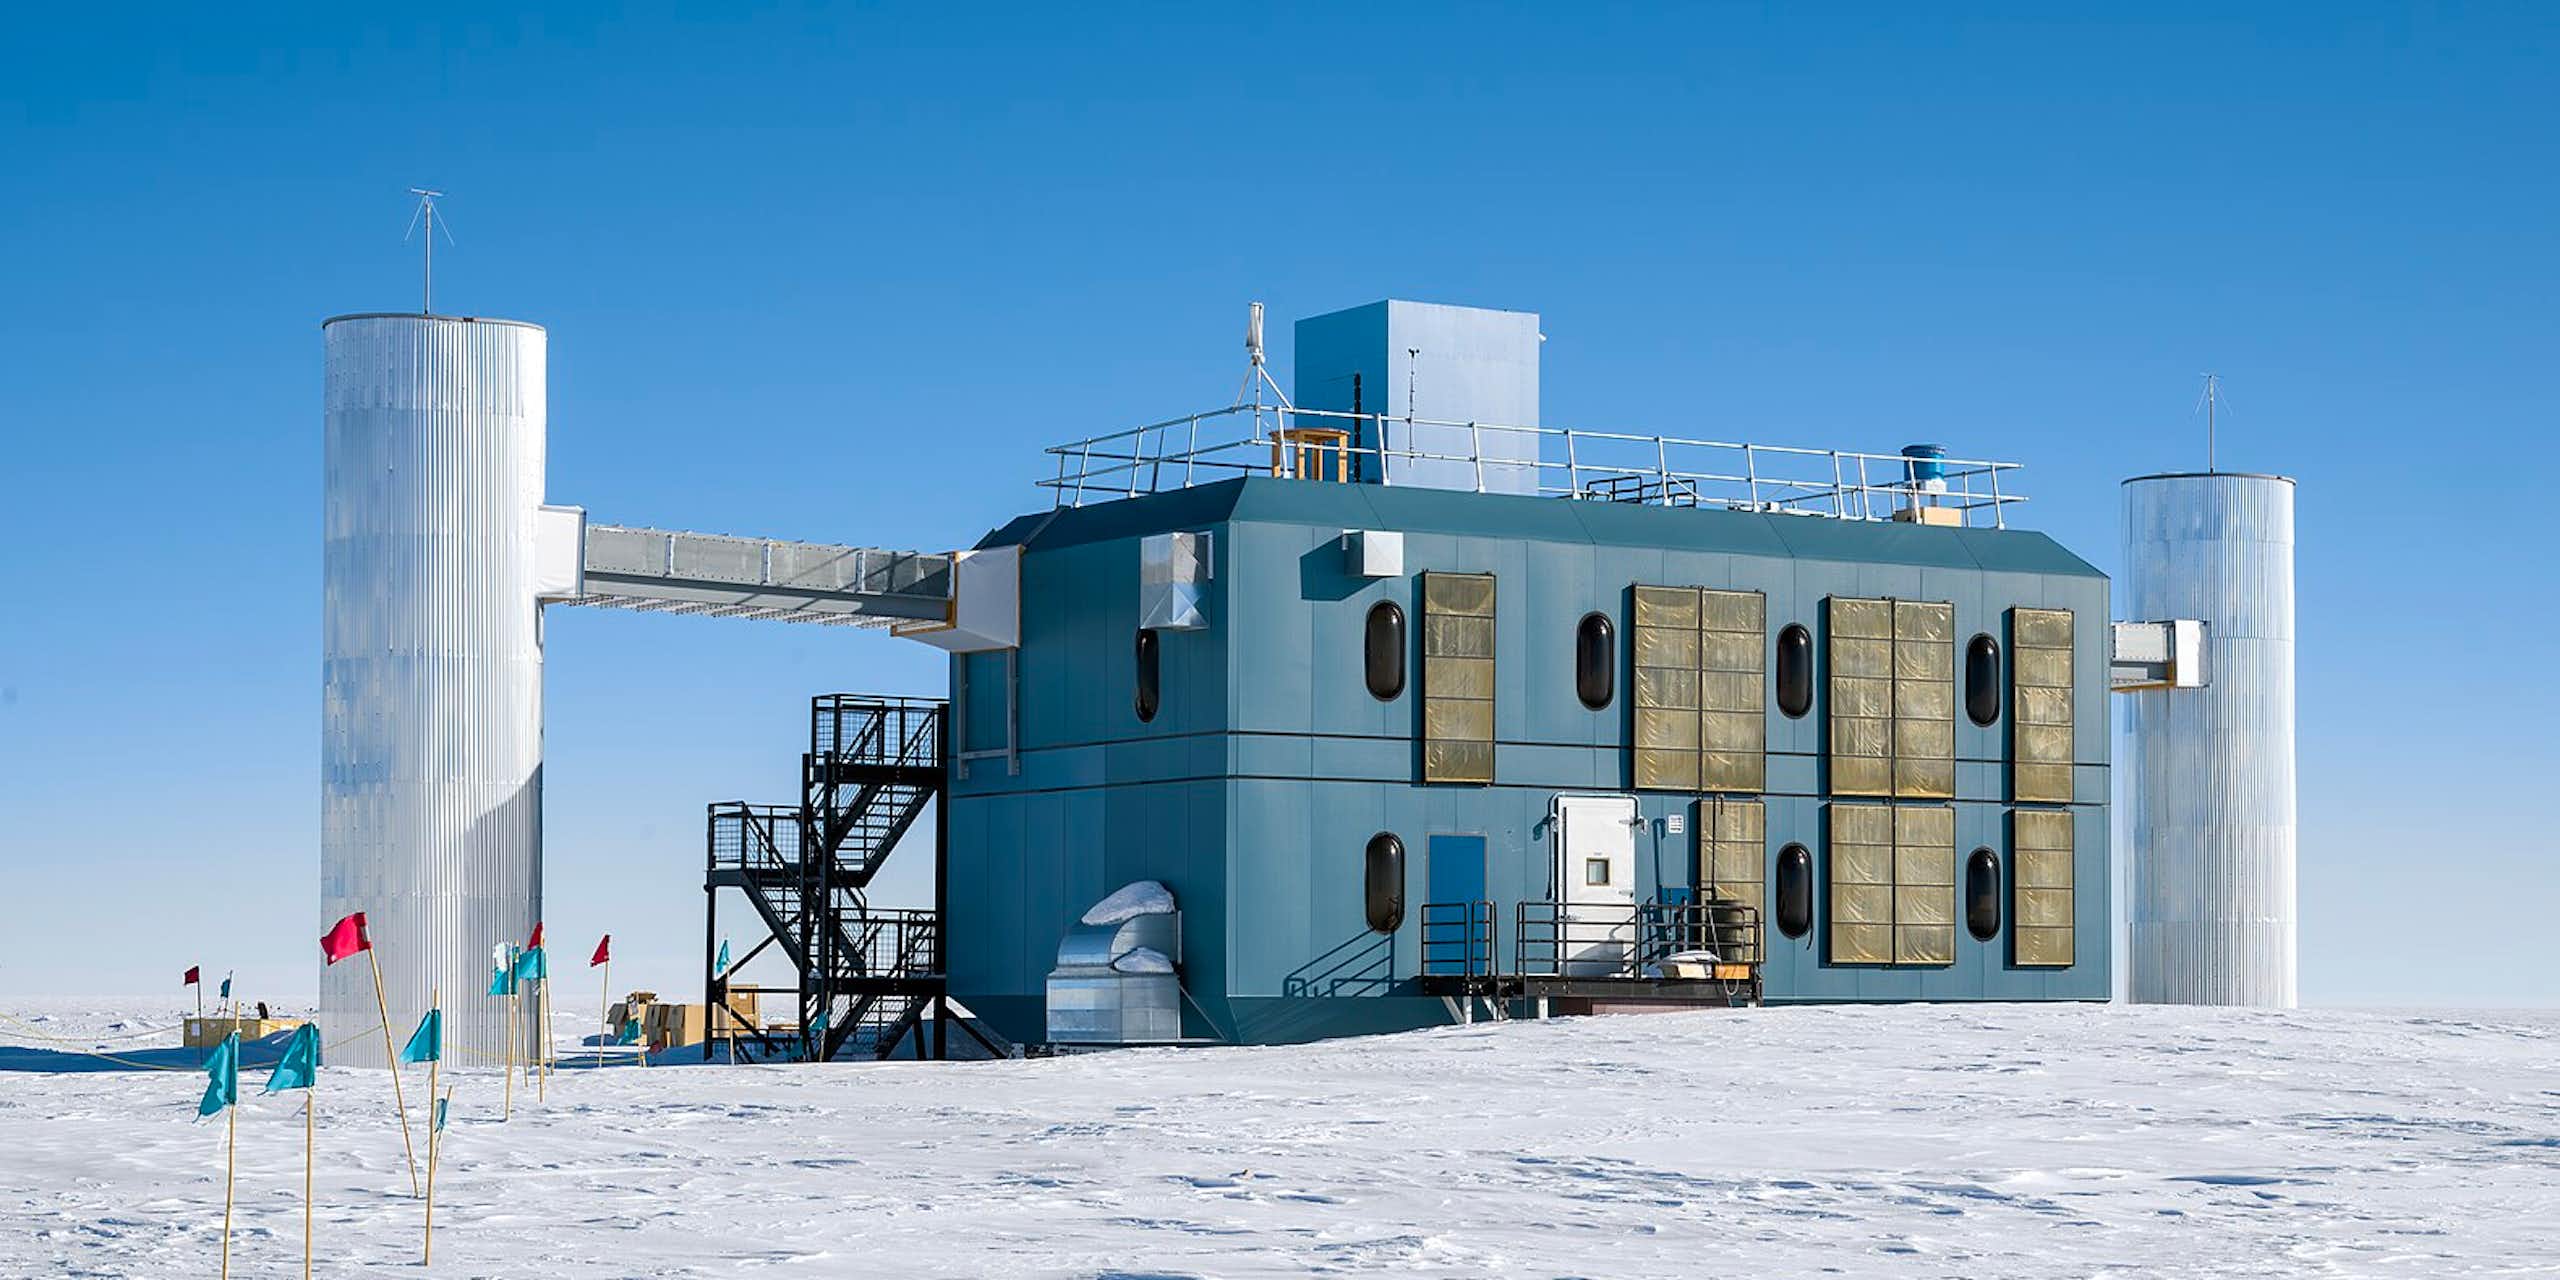 The IceCube research station, a rectangular building with three pillars attached, sitting on snowy ground.